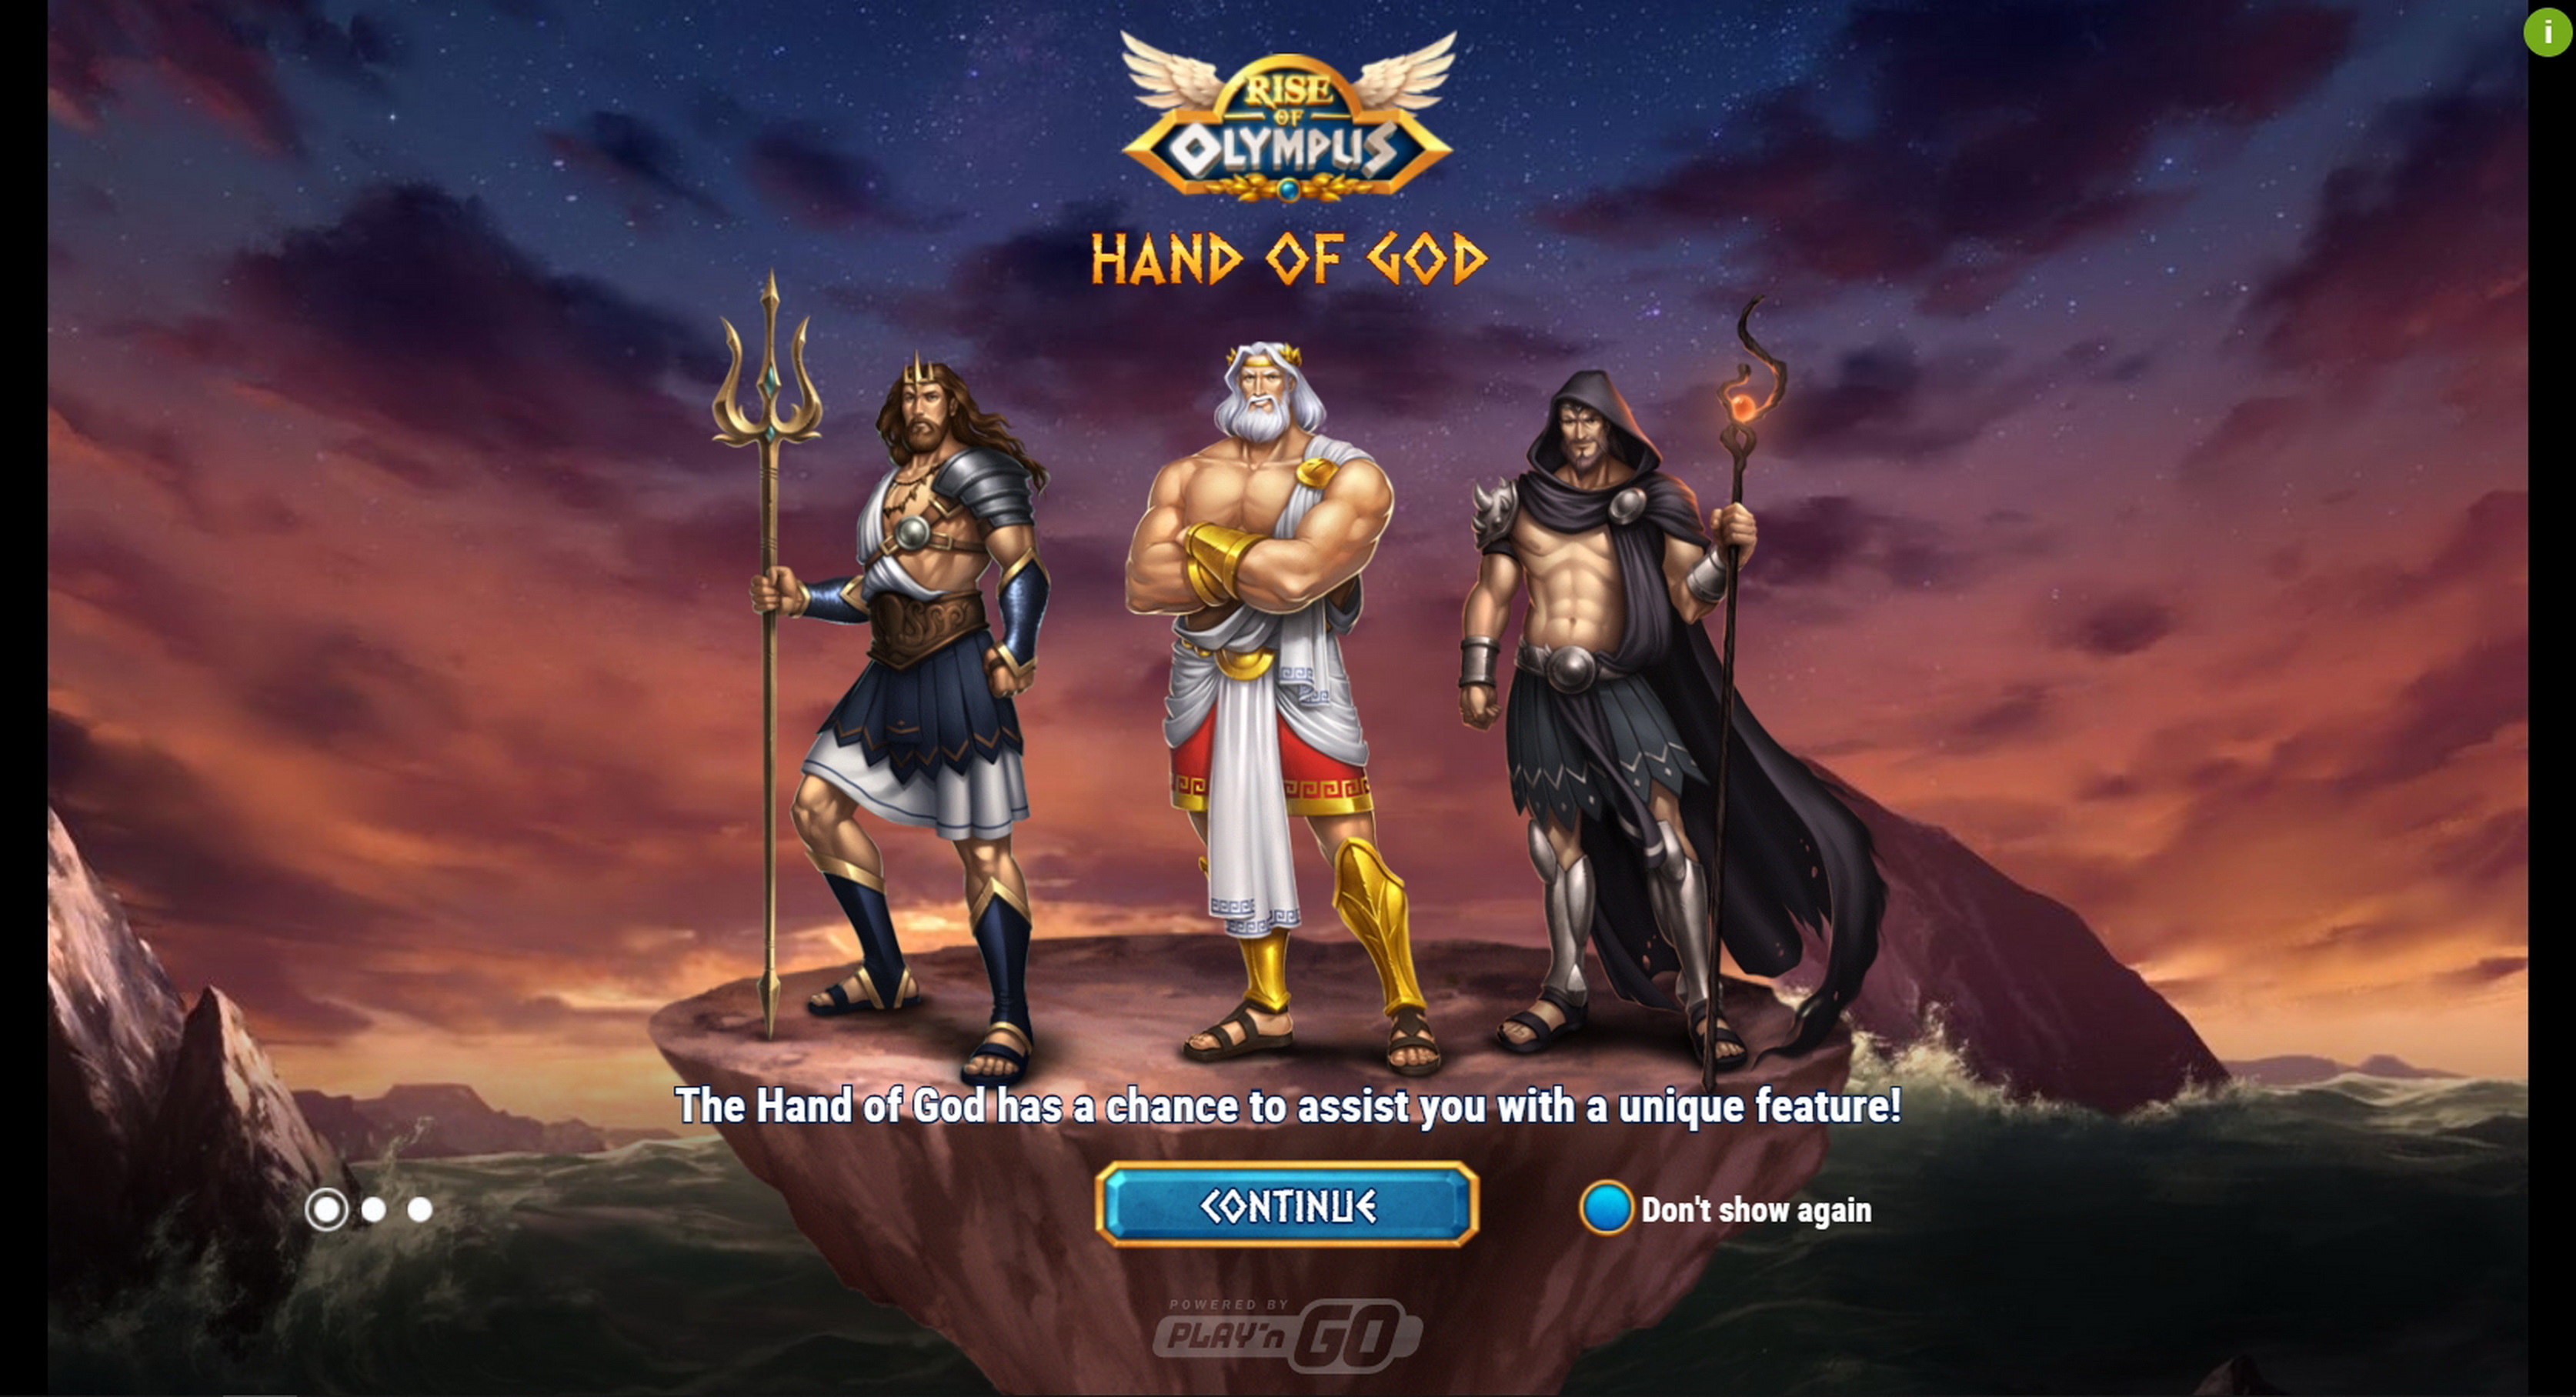 Play Rise Of Olympus Free Casino Slot Game by Playn GO